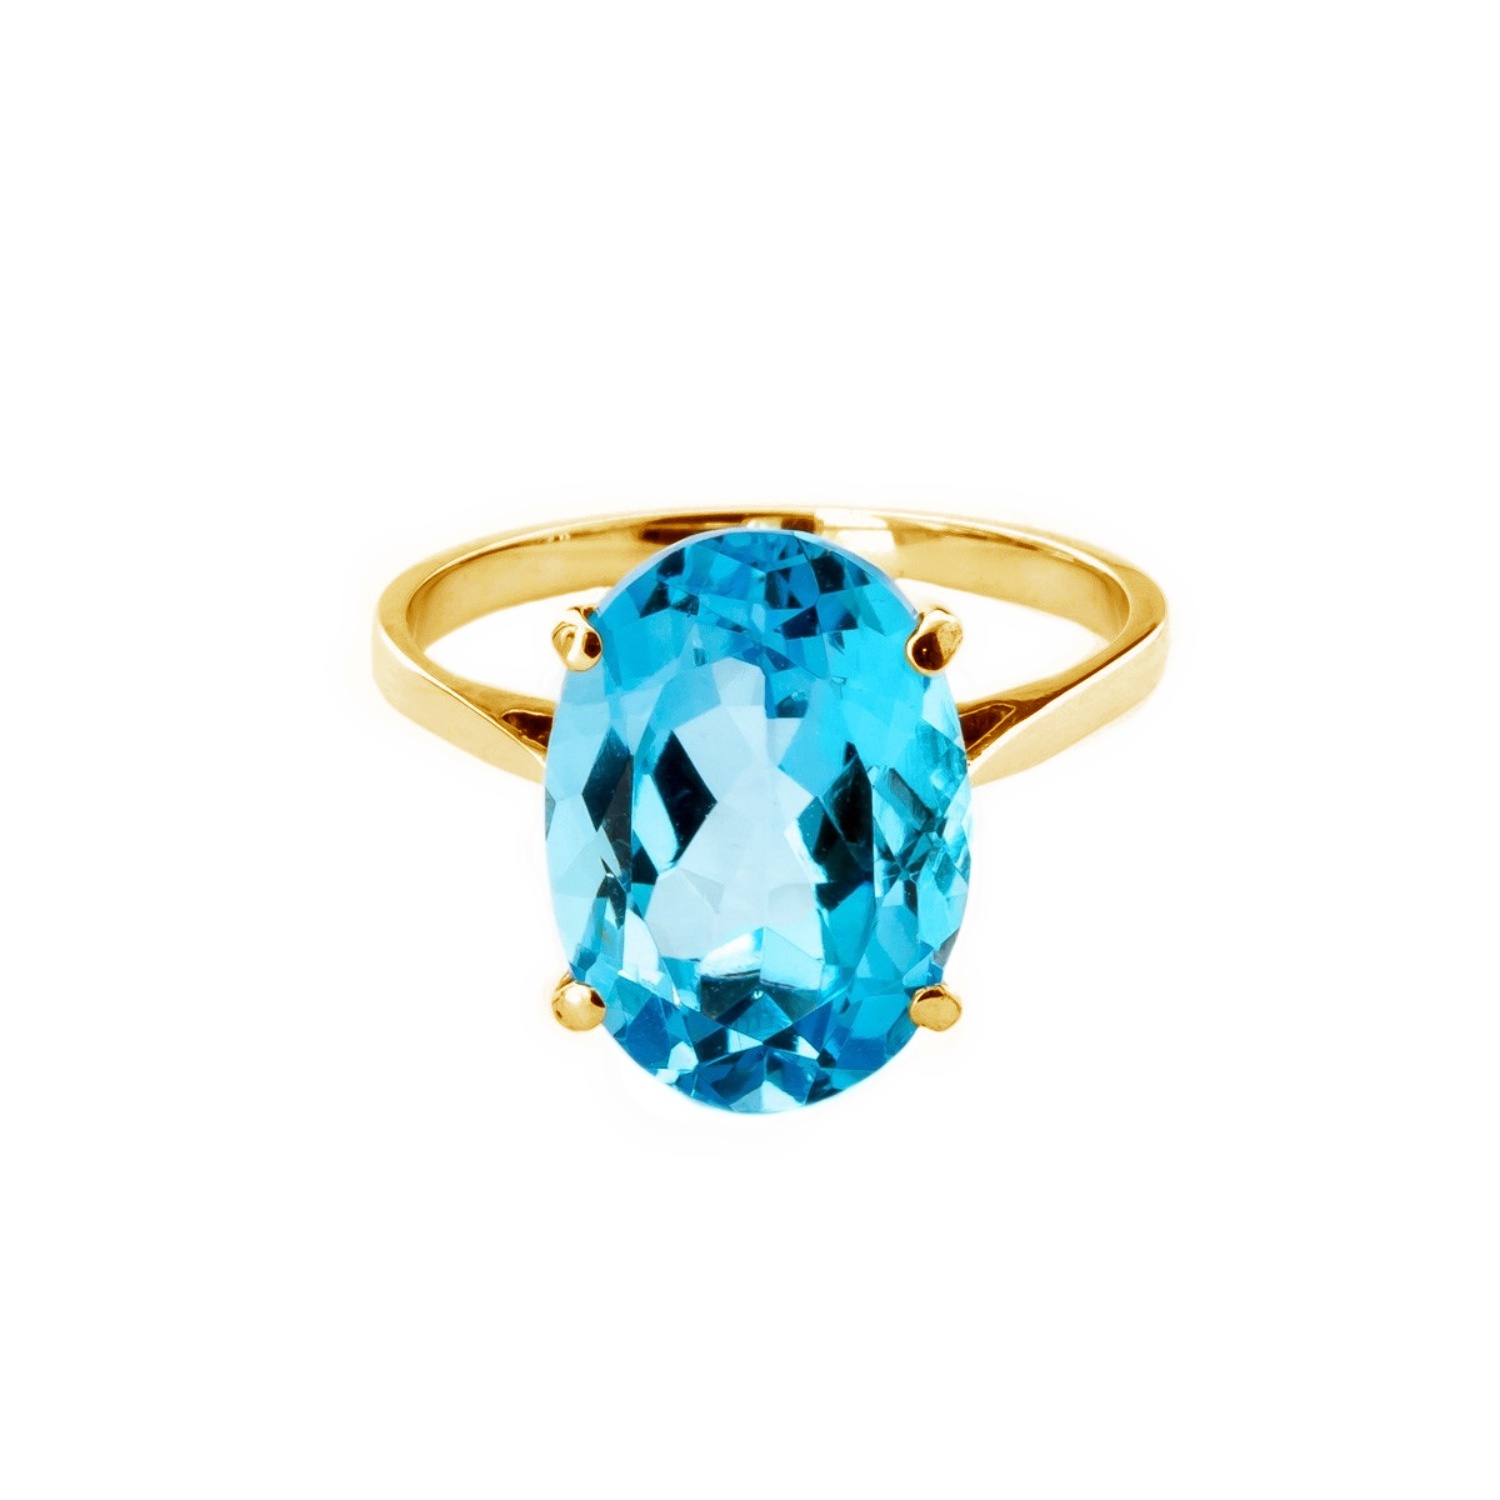 Galaxy Gold 14k High Polished Solid Yellow Gold Ring 8 Carat Natural Oval Blue Topaz (6.5) - image 1 of 5